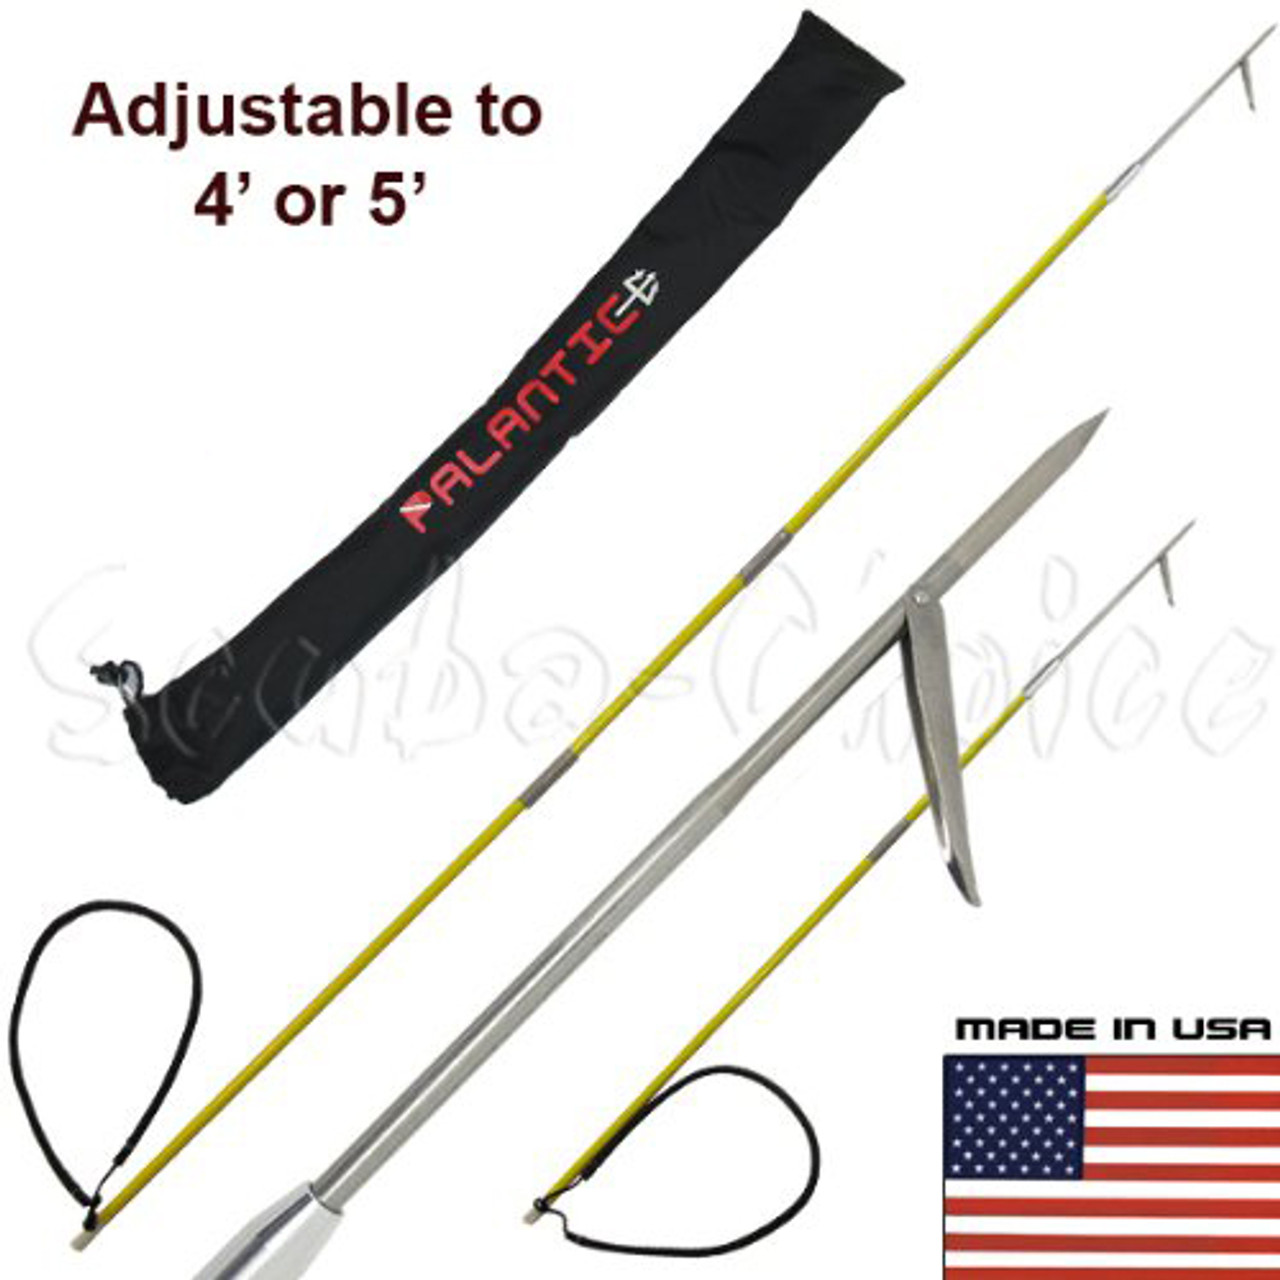 6' Travel Spearfishing 3Piece Pole Spear Single Barb Tip Adjustable to 4' &  5' - scubachoice